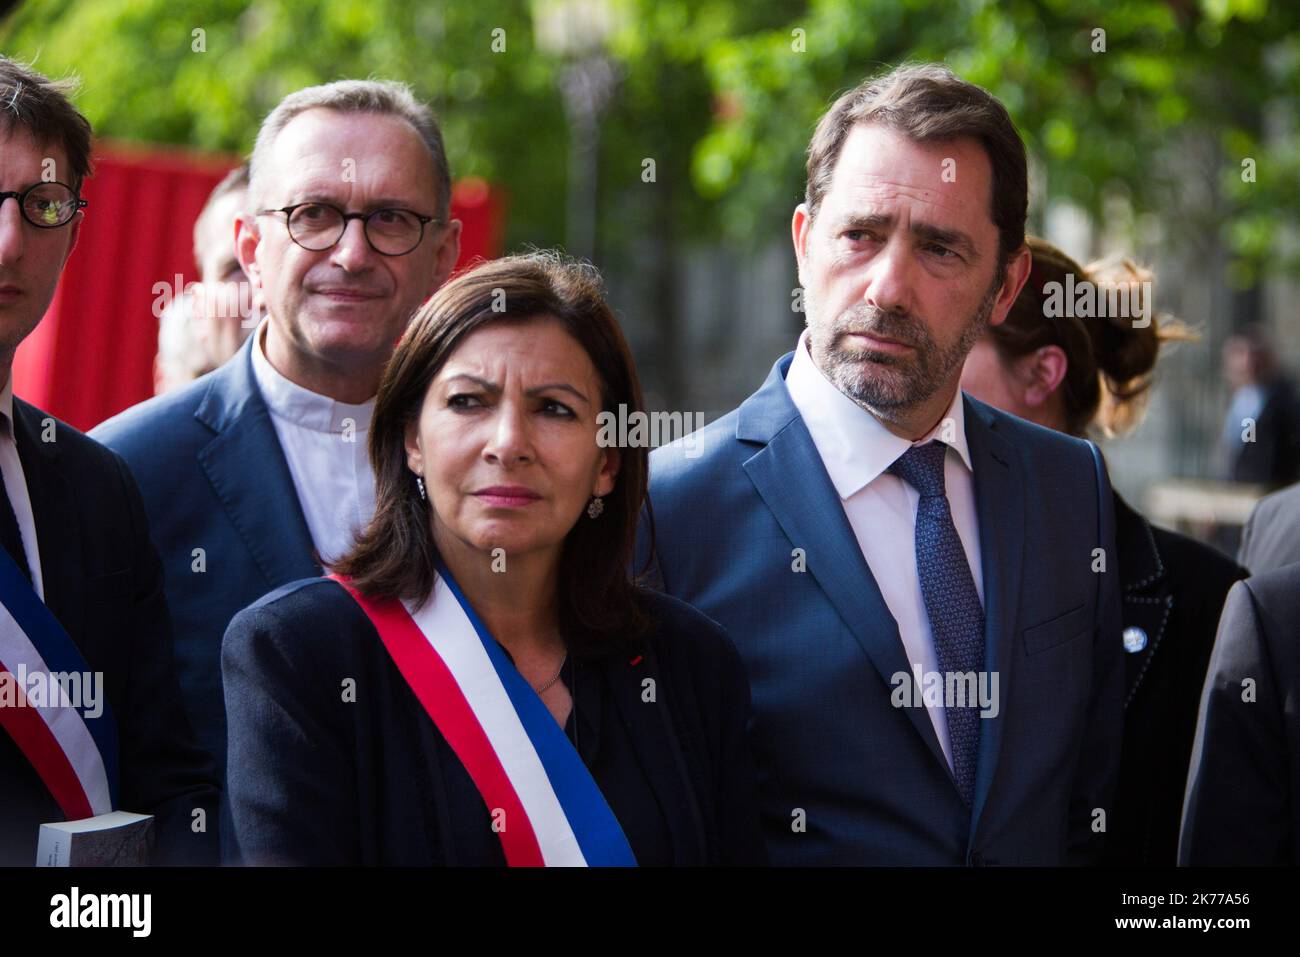 French Interior Minister Christophe Castaner, Paris prefect Didier Lallement, Paris mayor Anne Hidalgo, and other officials walk by Notre Dame cathedral on April 18, 2019 in Paris. France paid a daylong tribute on April 18, 2019 to the Paris firefighters who saved Notre Dame Cathedral from collapse, while construction workers rushed to secure an area above one of the church's famed rose-shaped windows and other vulnerable sections of the fire-damaged landmark  Stock Photo